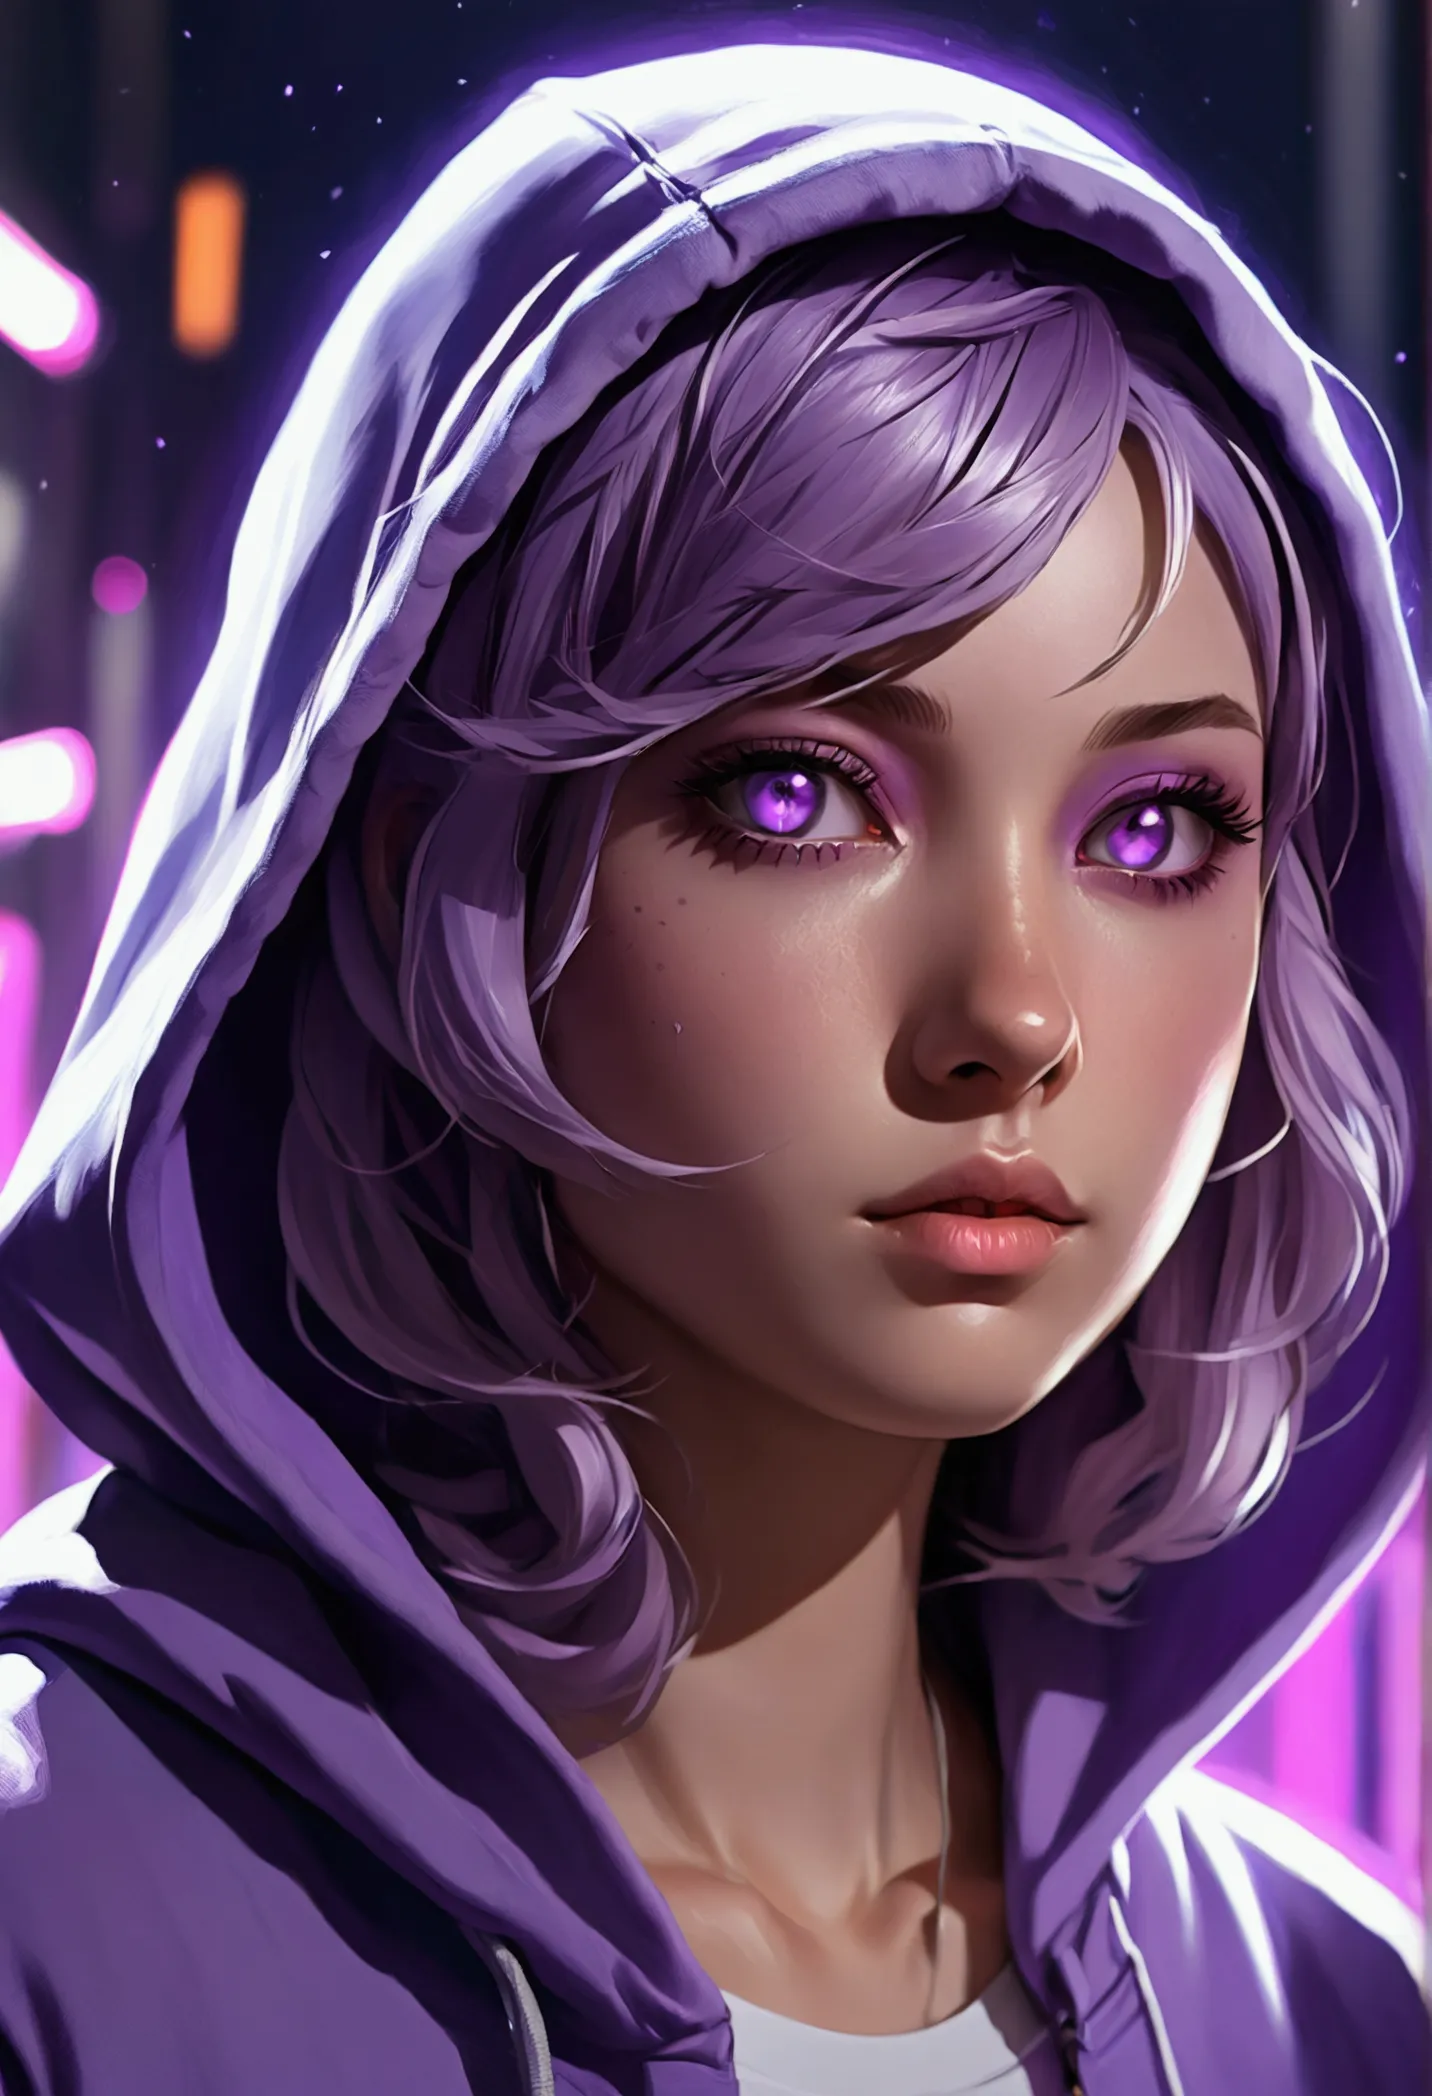 a close up of a woman with hoodies with a purple light in their hair, anime art wallpaper 4 k, anime art wallpaper 4k, anime art...